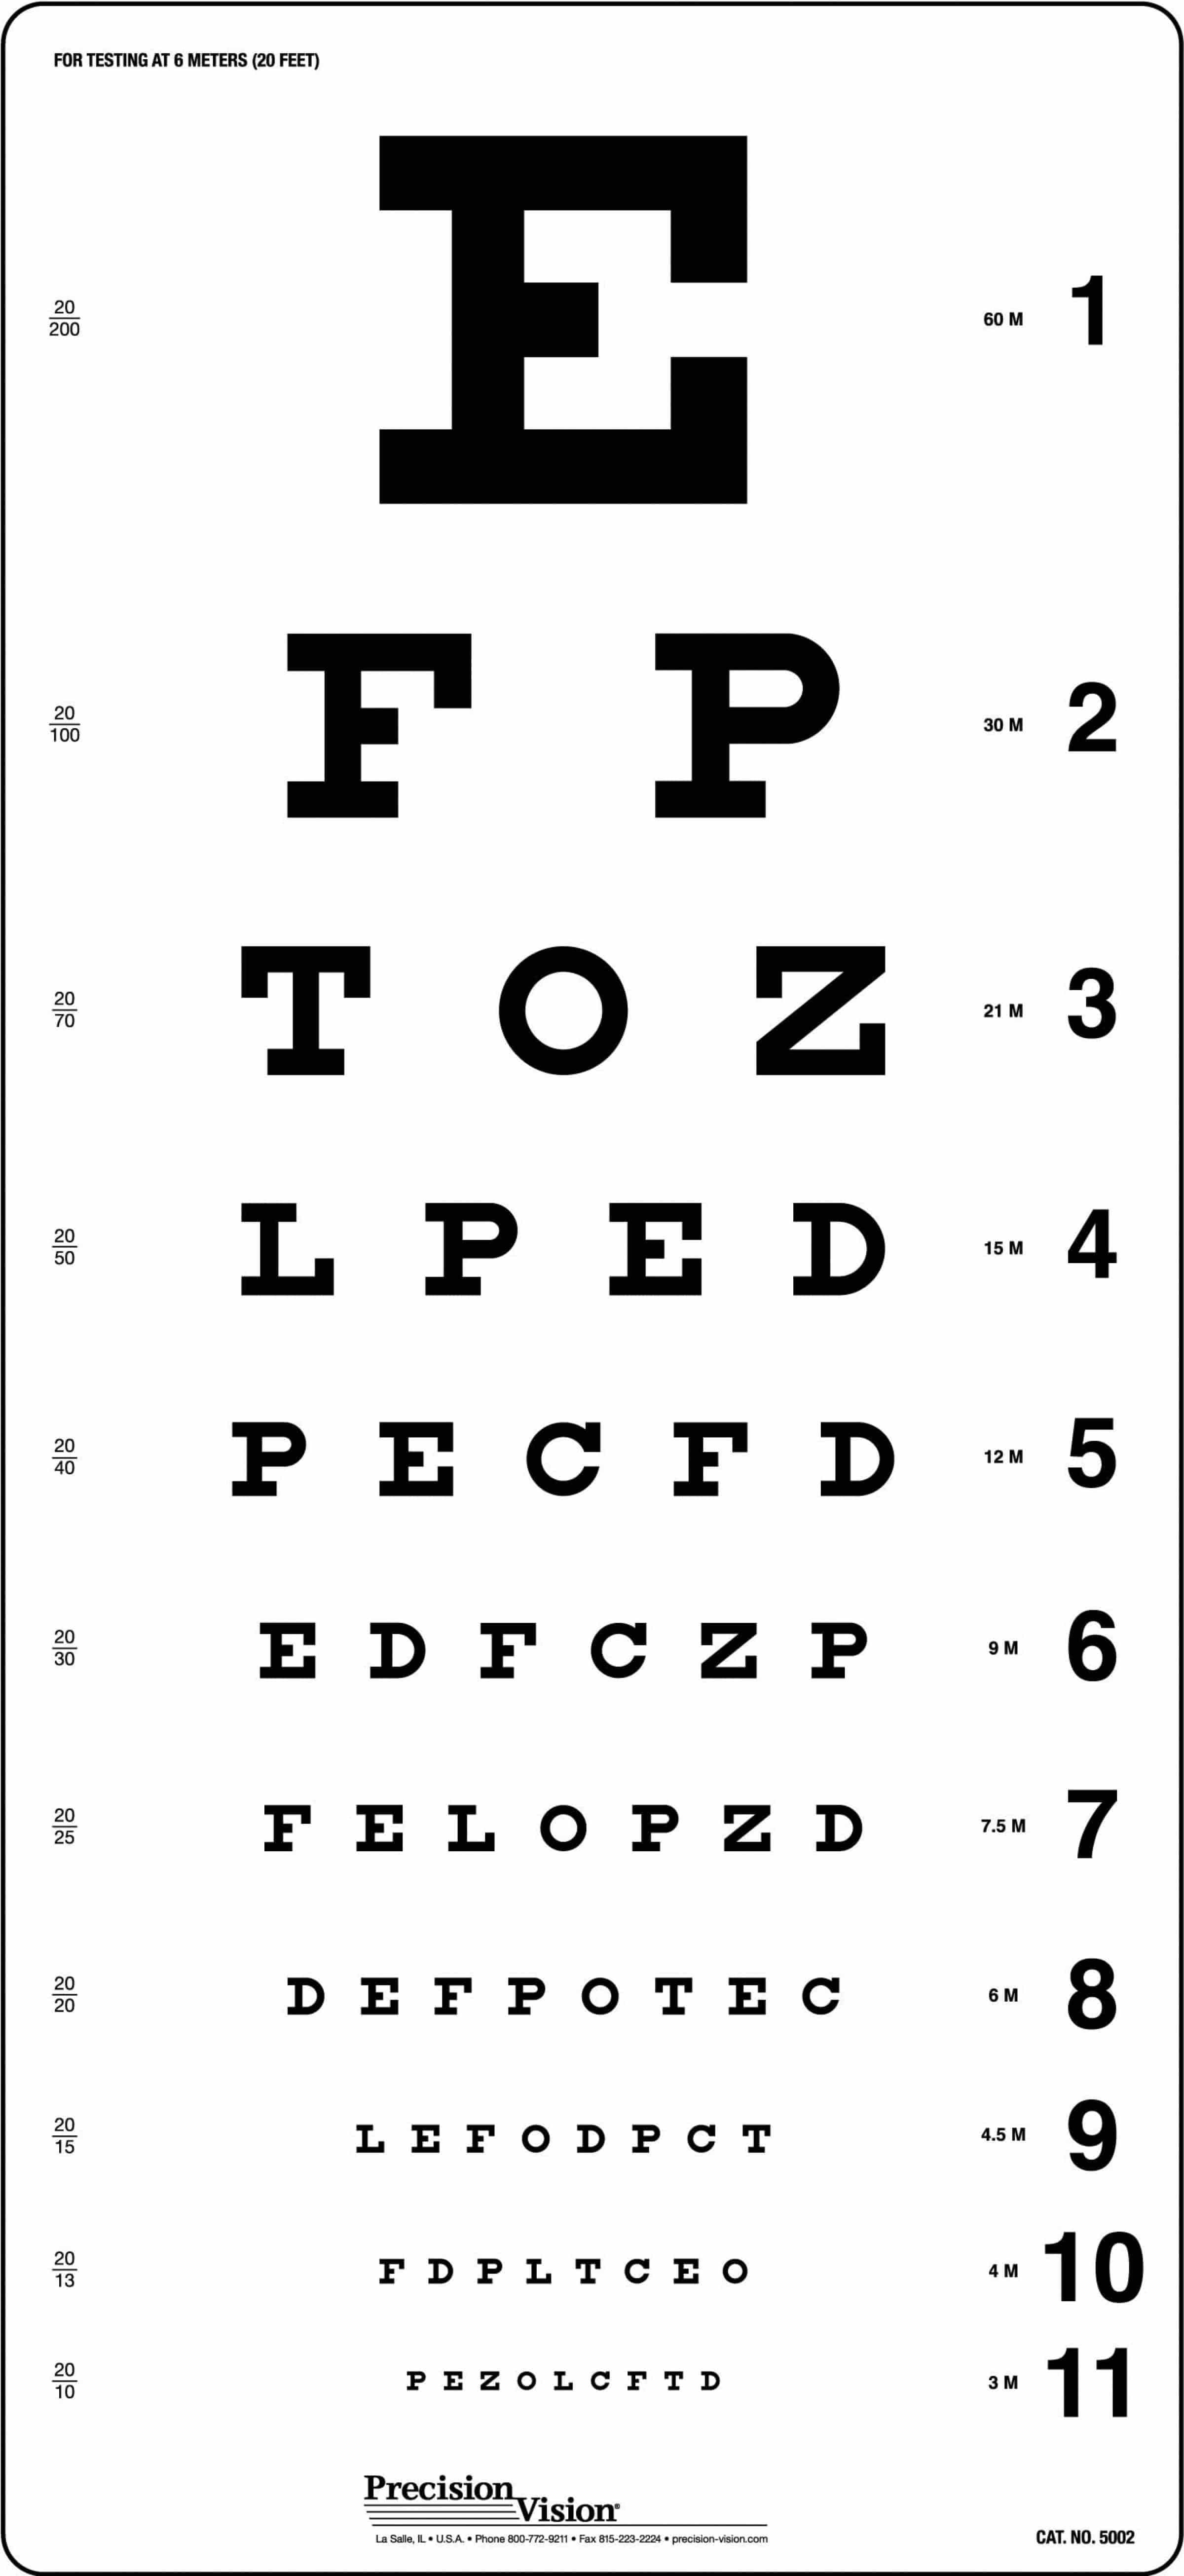 Traditional Snellen Eye Chart - Precision Vision